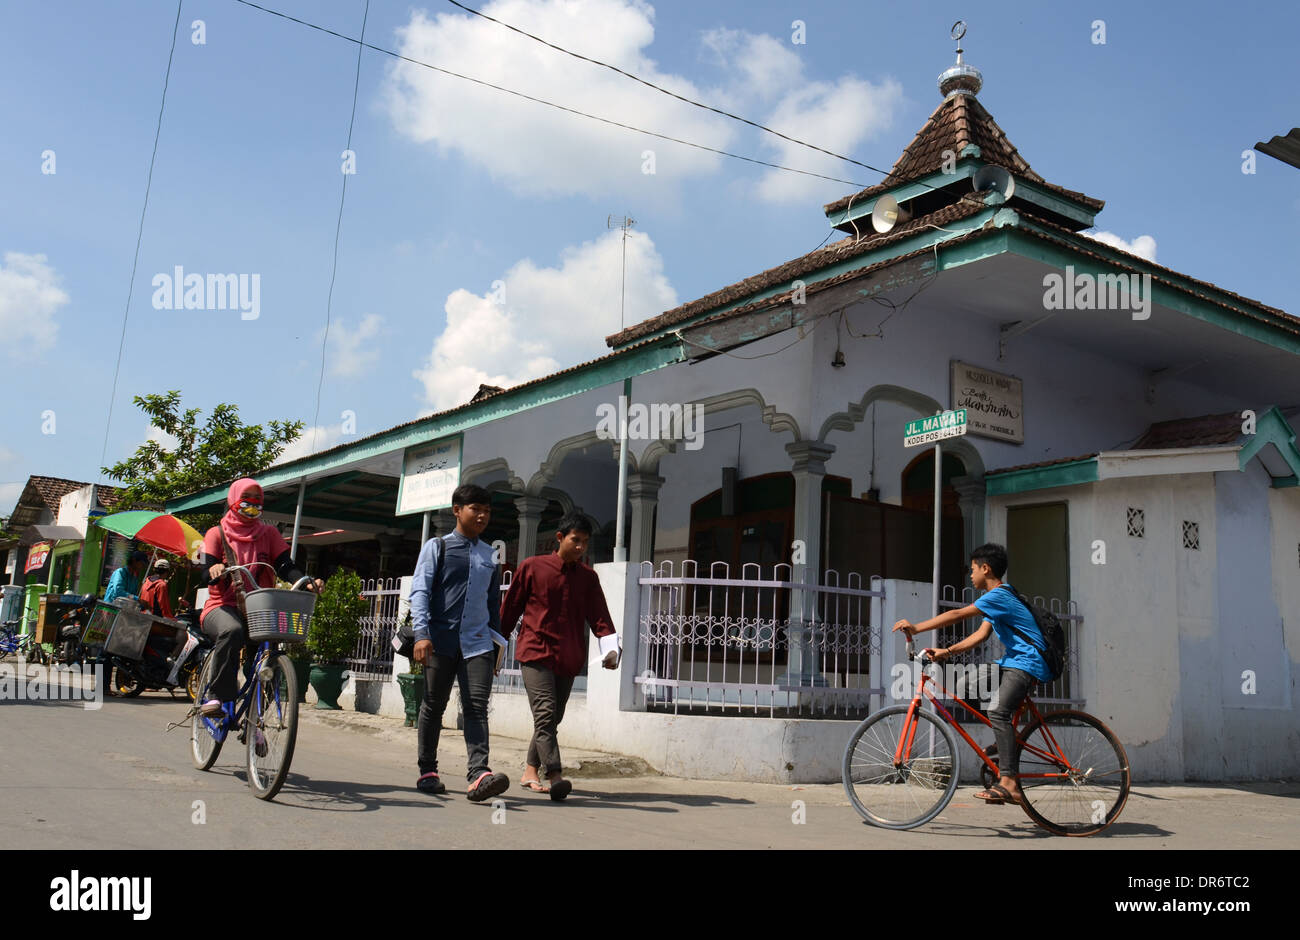 General view in the village of Pare. 'English Village' is the nickname for the village of Pare in Kediri, East Java. Stock Photo